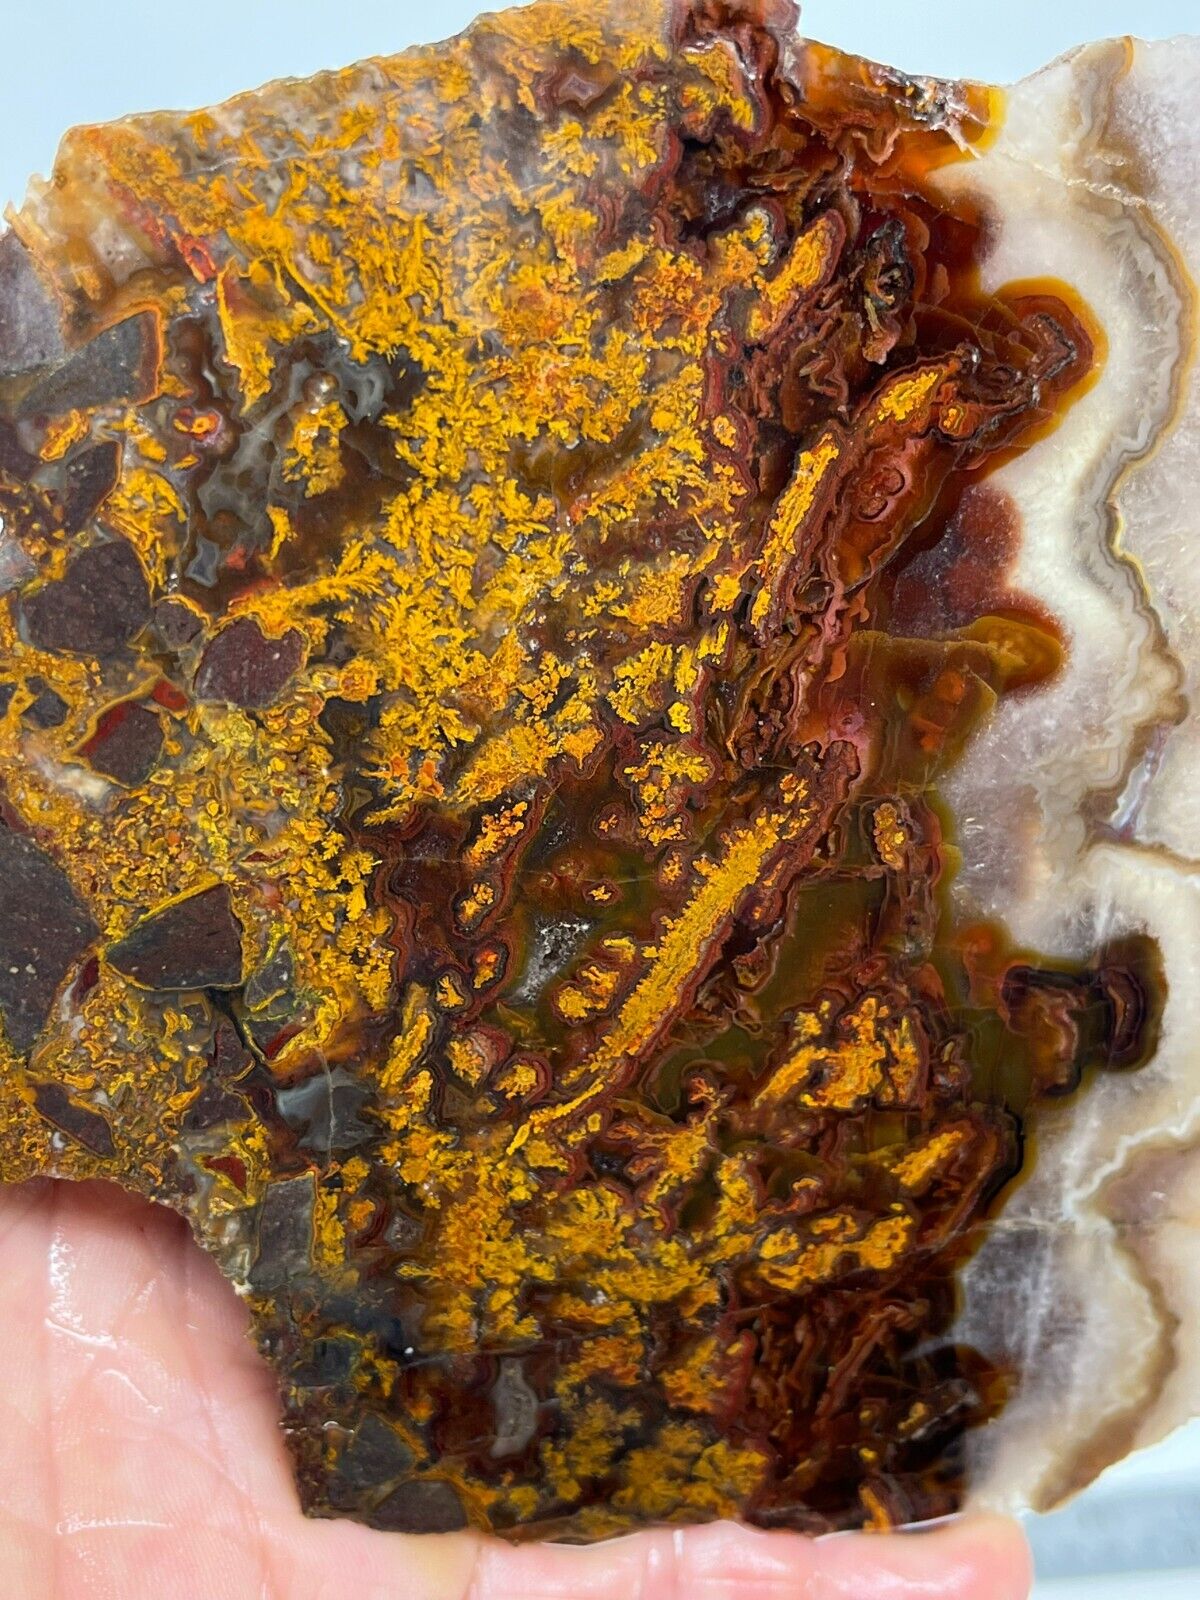 Turkish Golden Moss Agate slab Cabbing Lapidary Collecting Combo Ship Avail